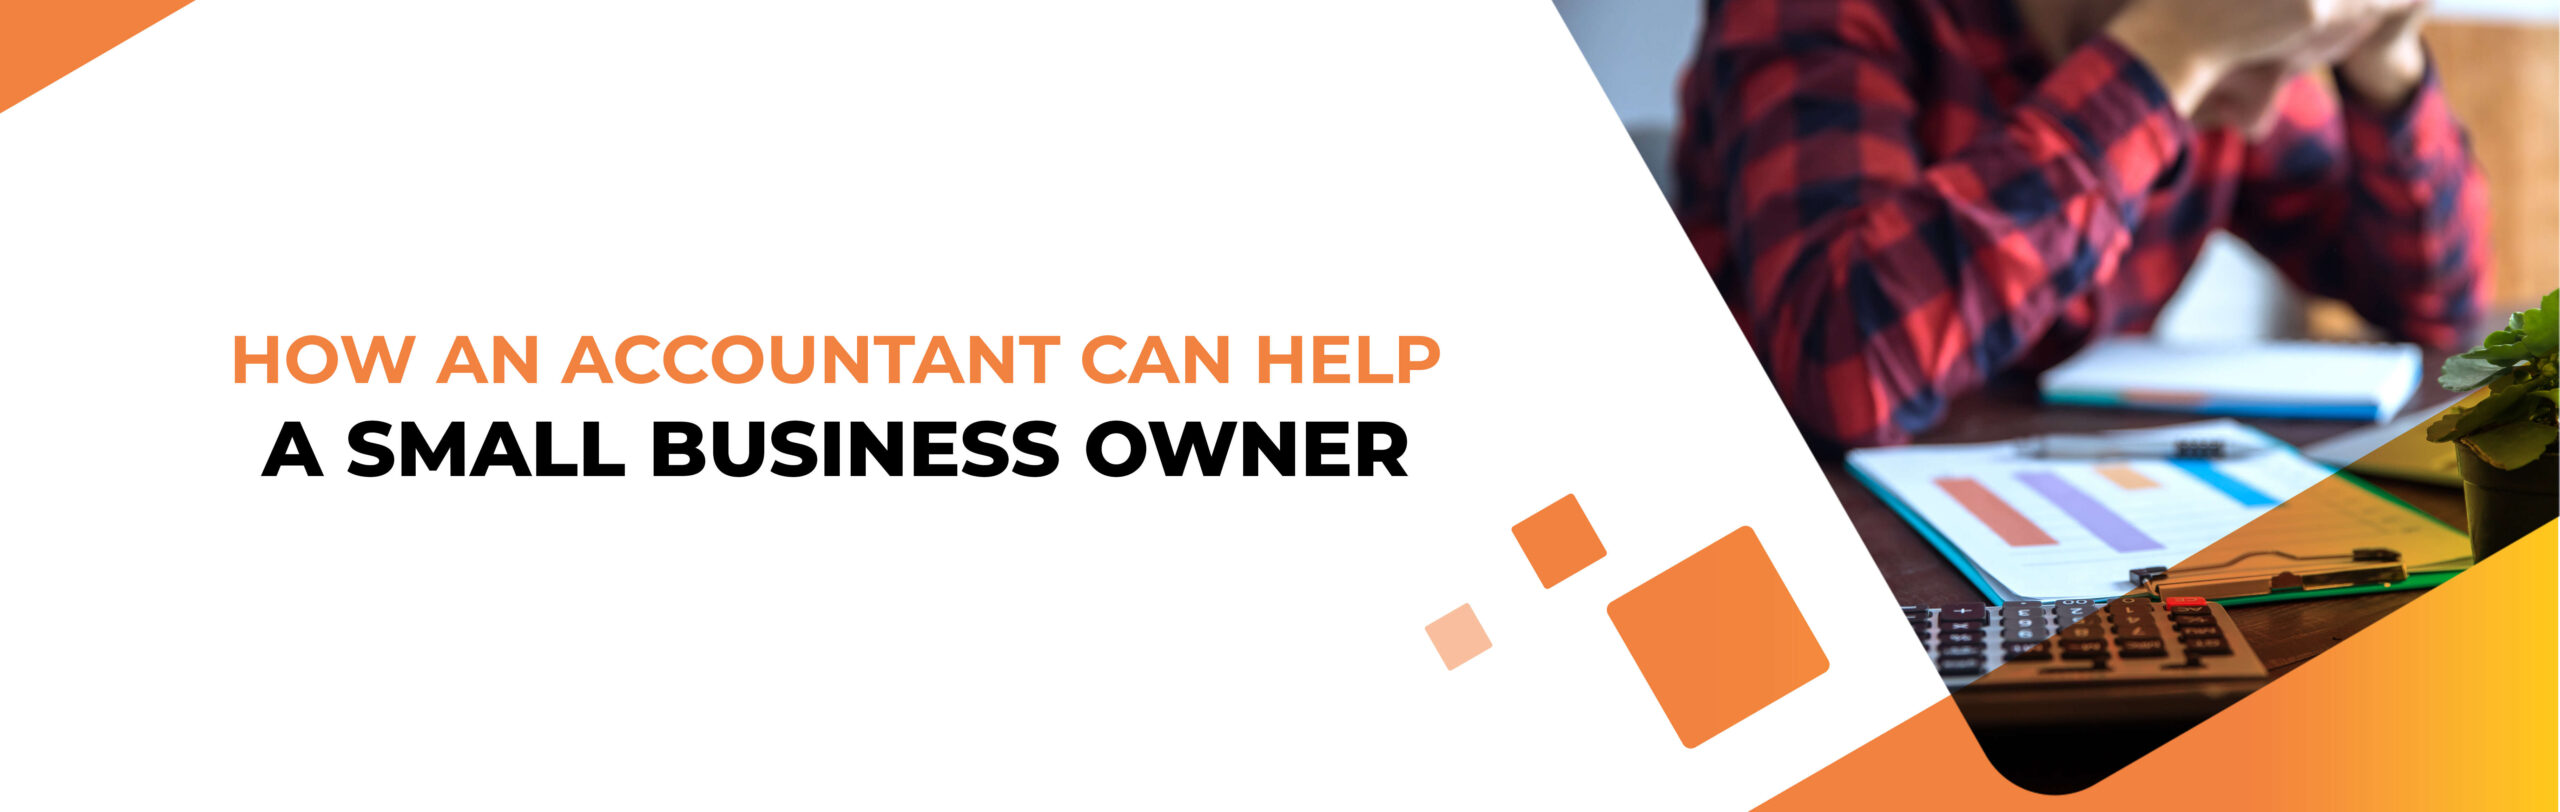 How an Accountant Can Help a Small Business Owner